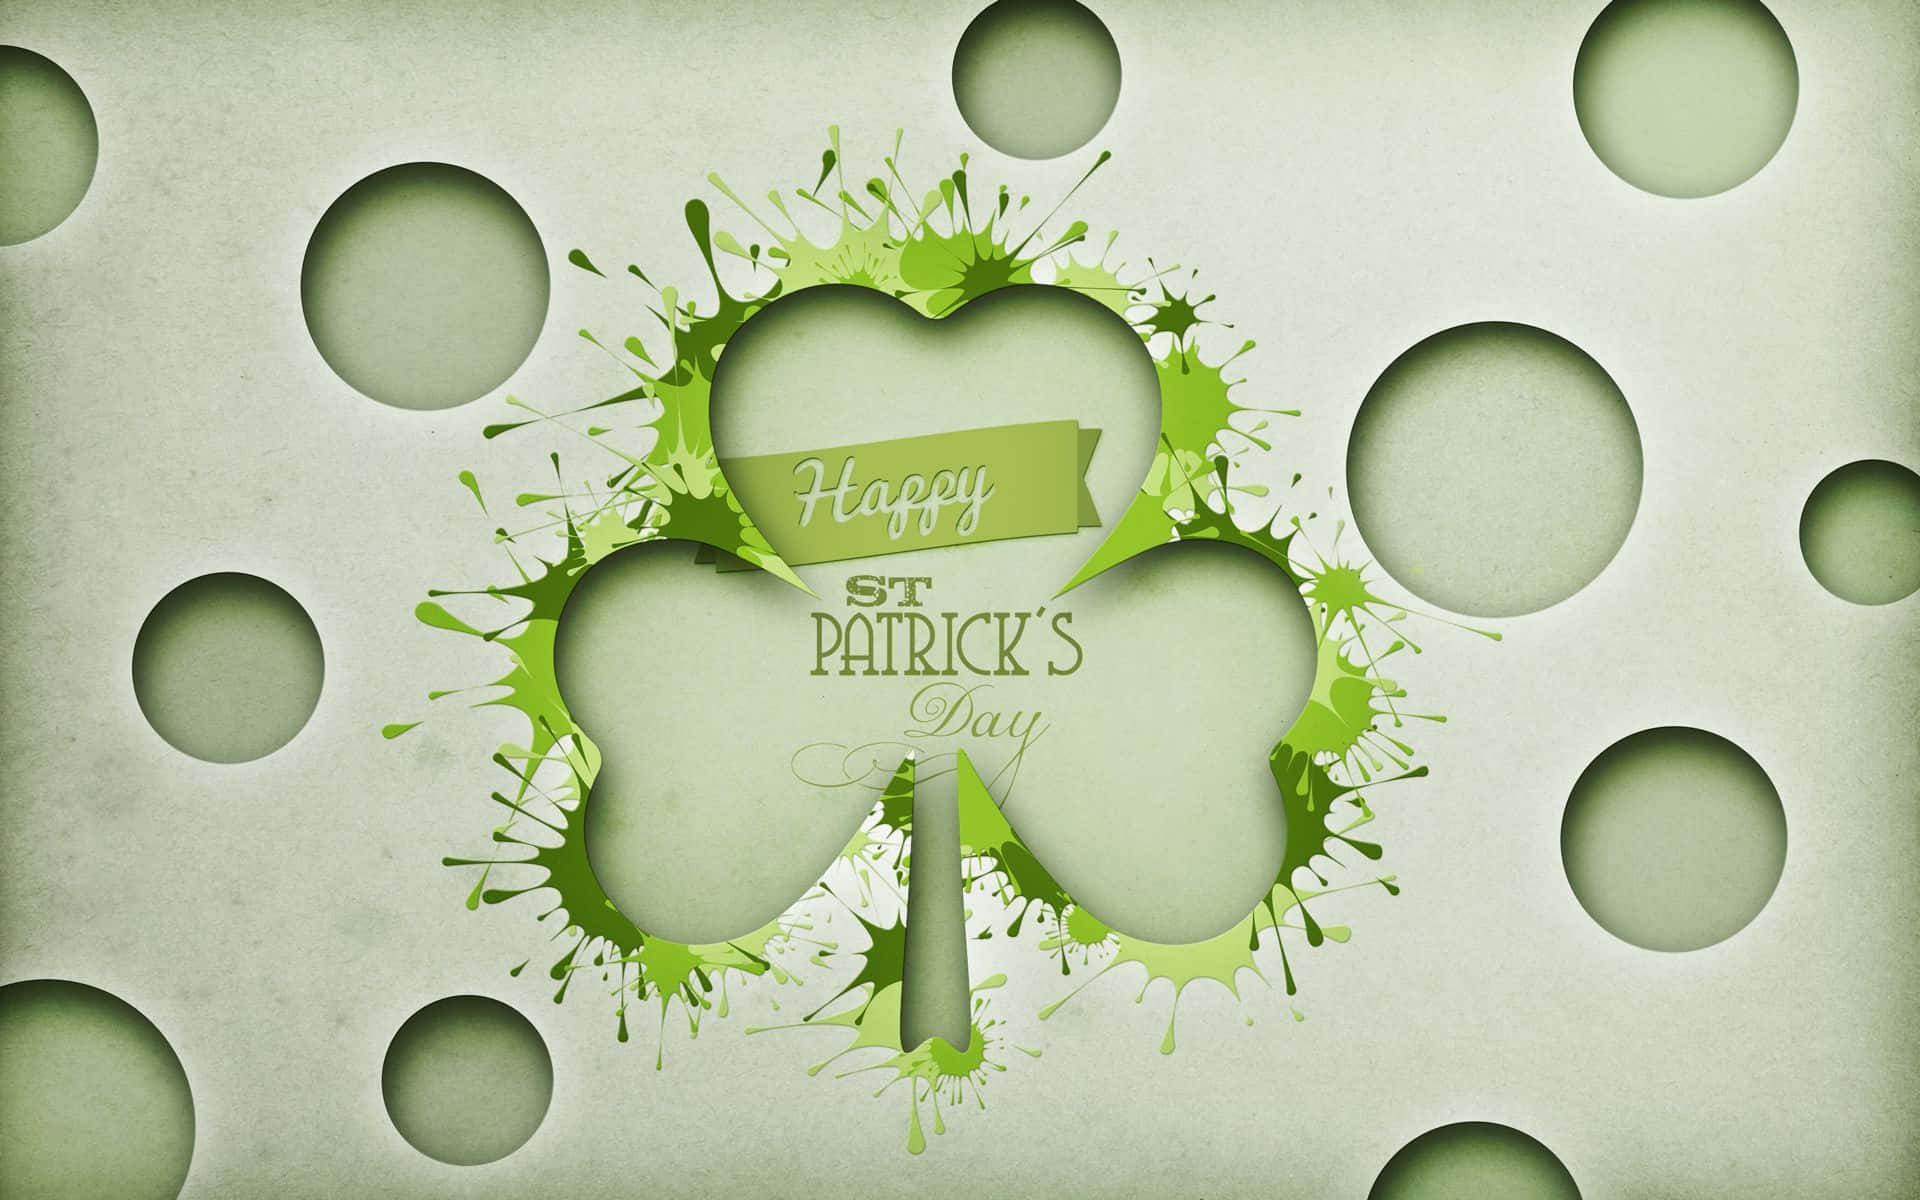 St. Patrick's Day And Paint Splatter Background